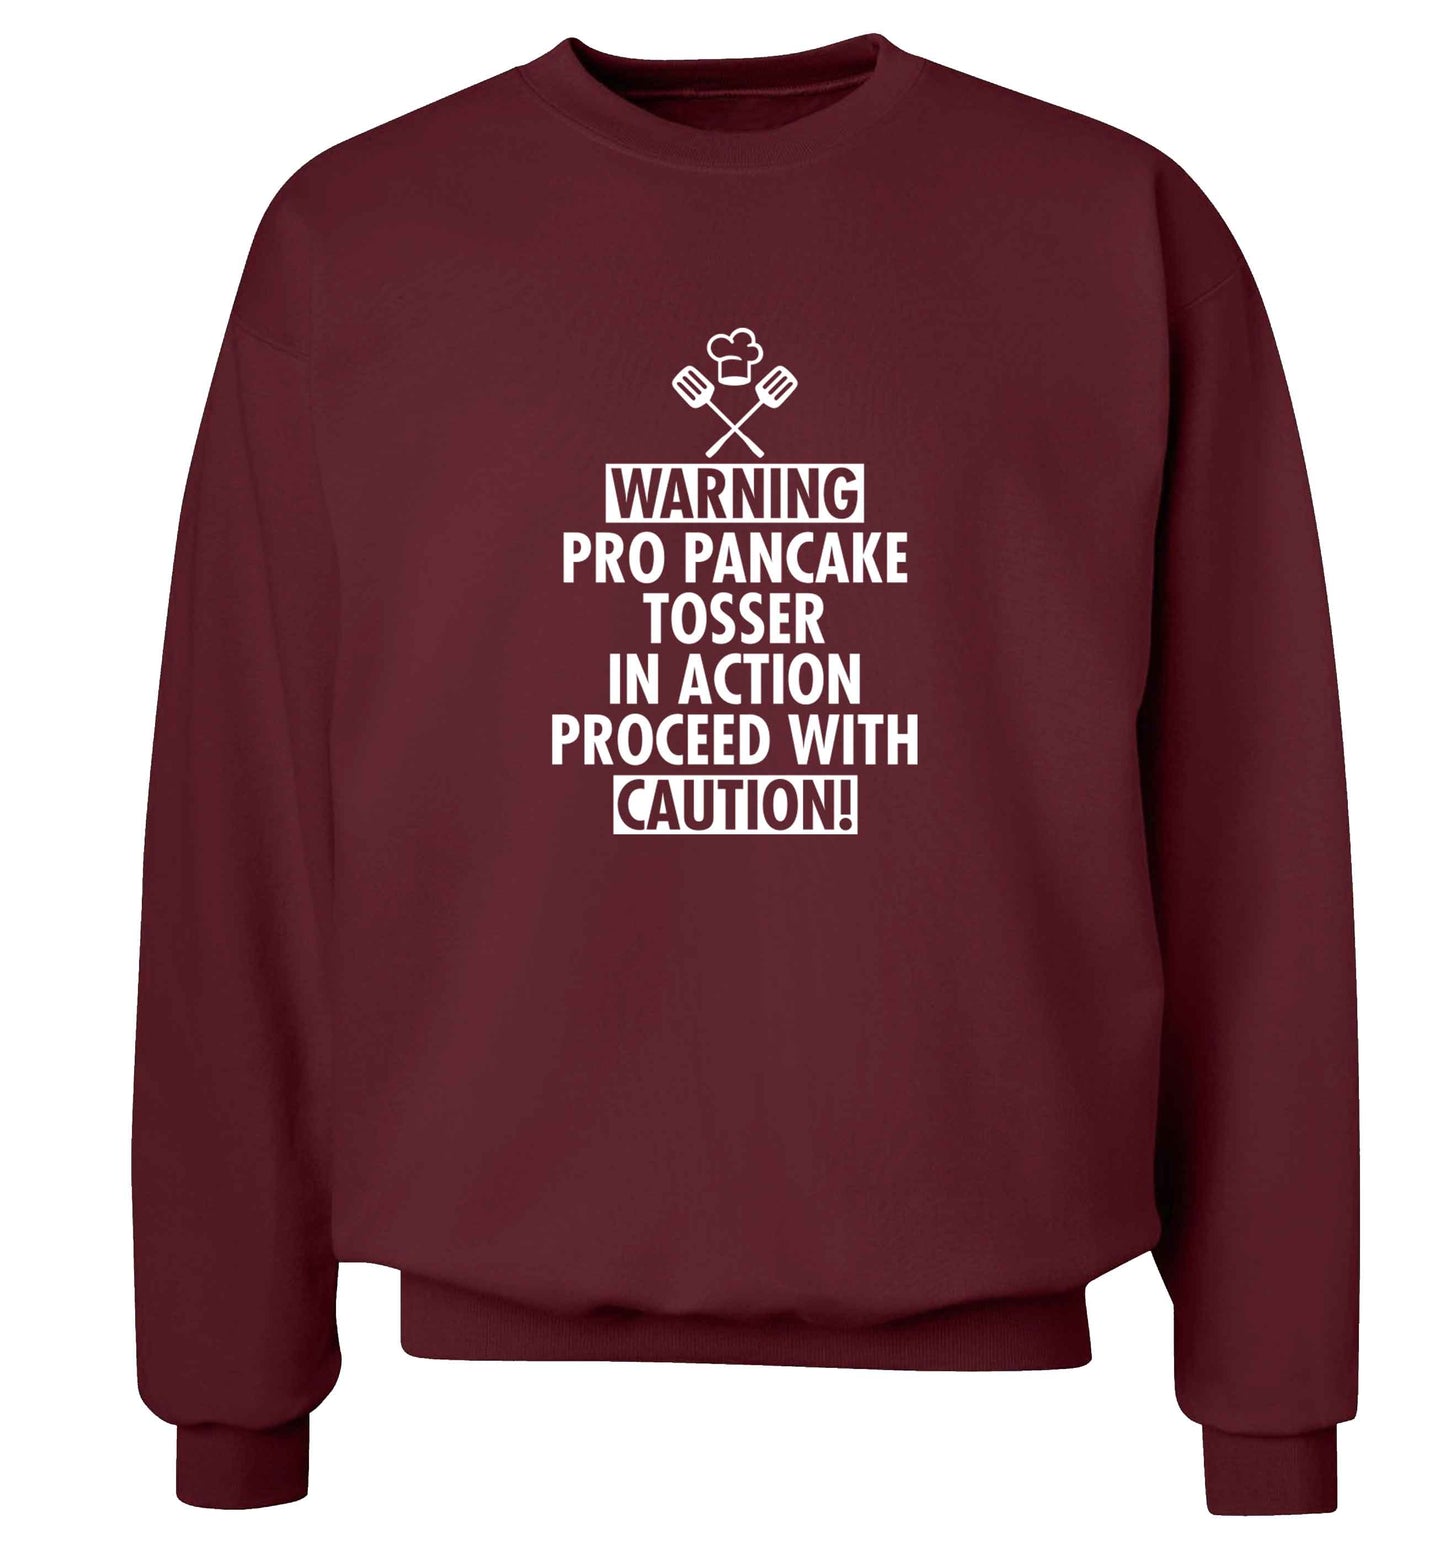 Warning pro pancake tosser in action proceed with caution adult's unisex maroon sweater 2XL